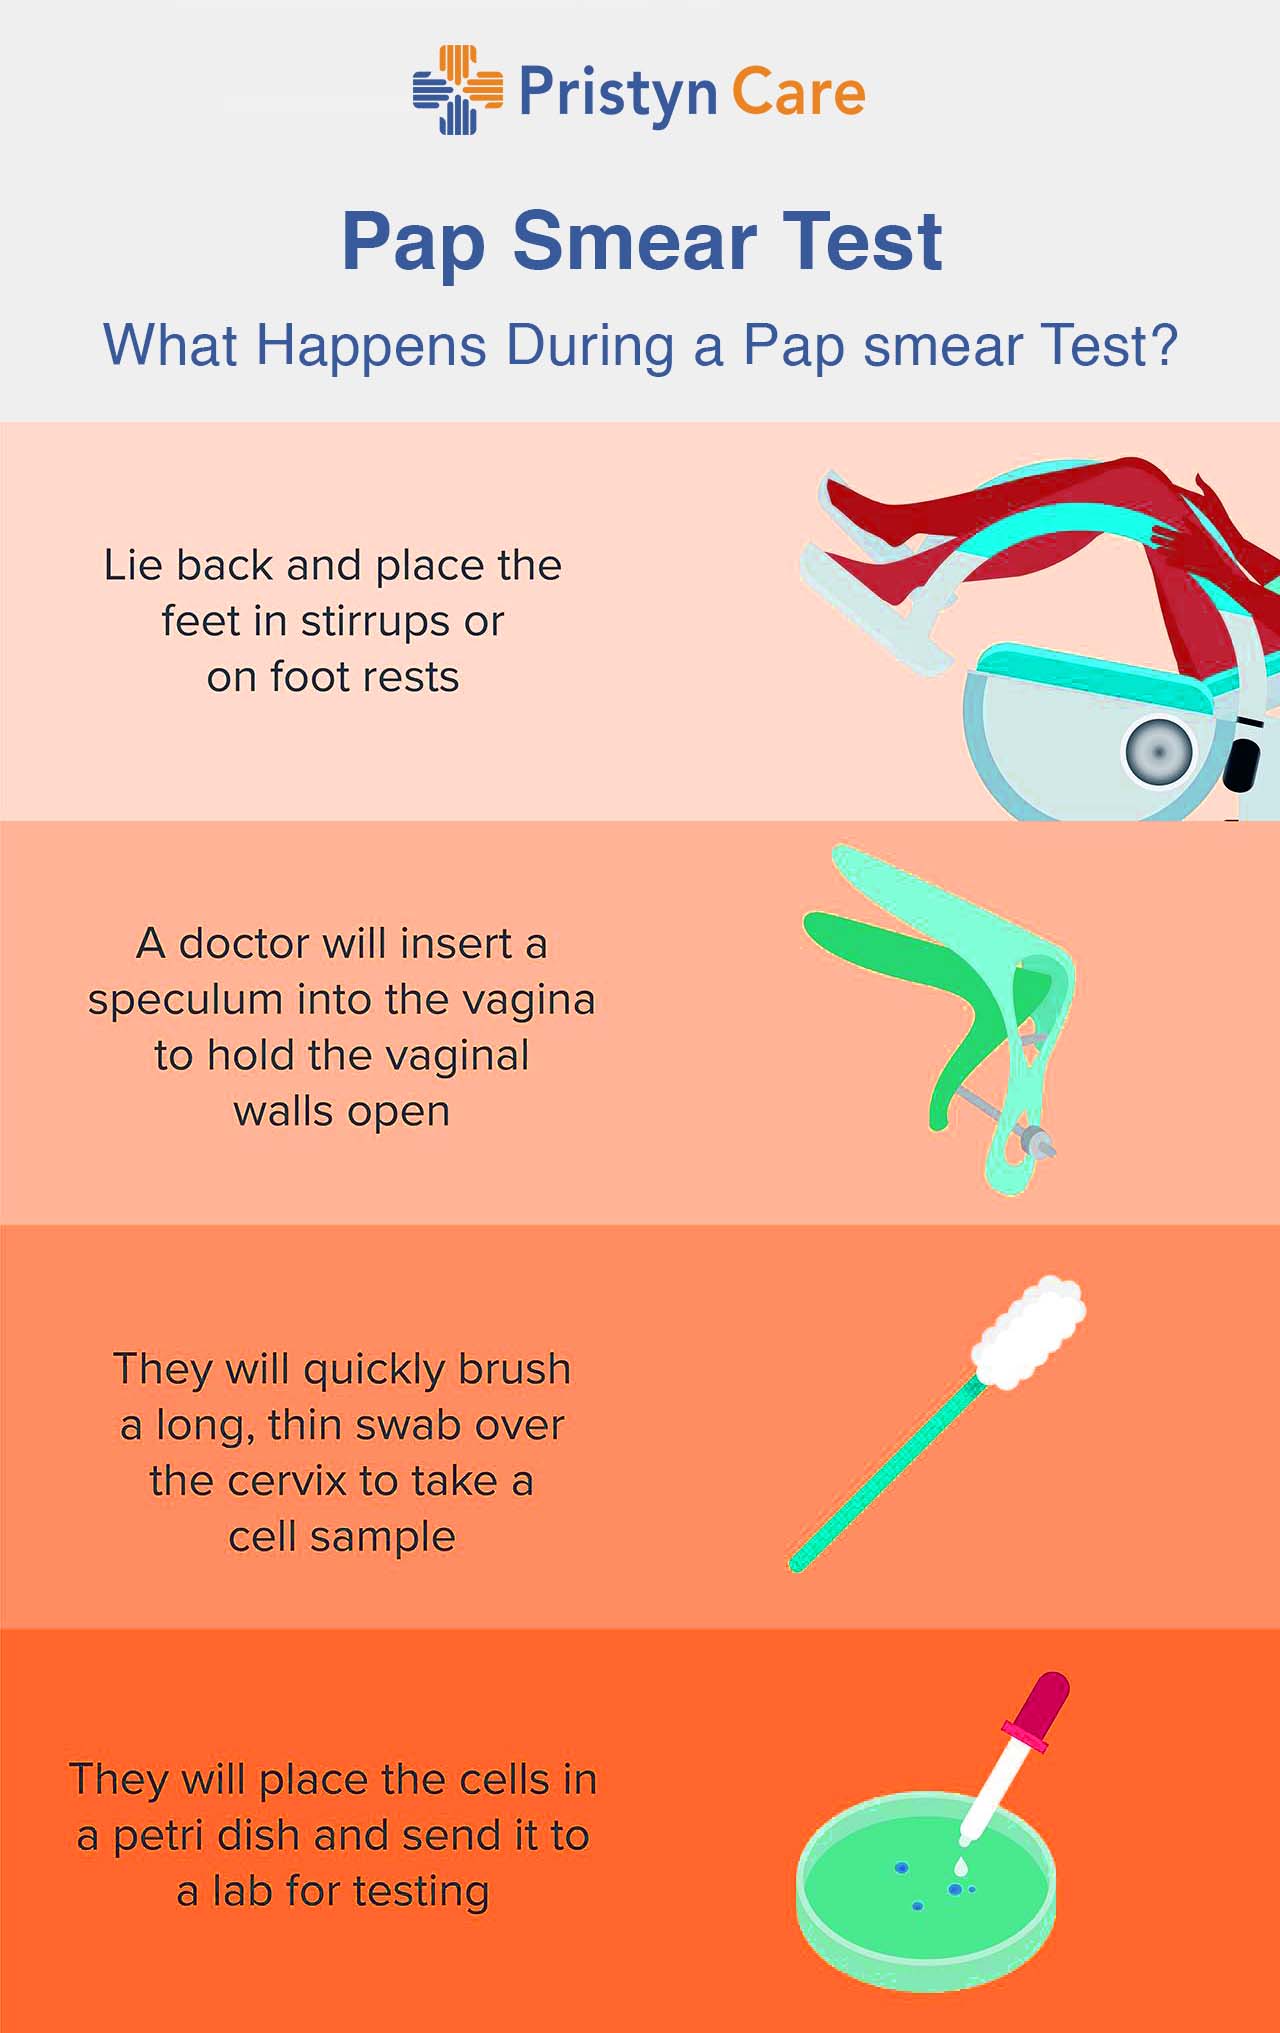 Preventative Care 101: How Pap Smears Can Save Your Life